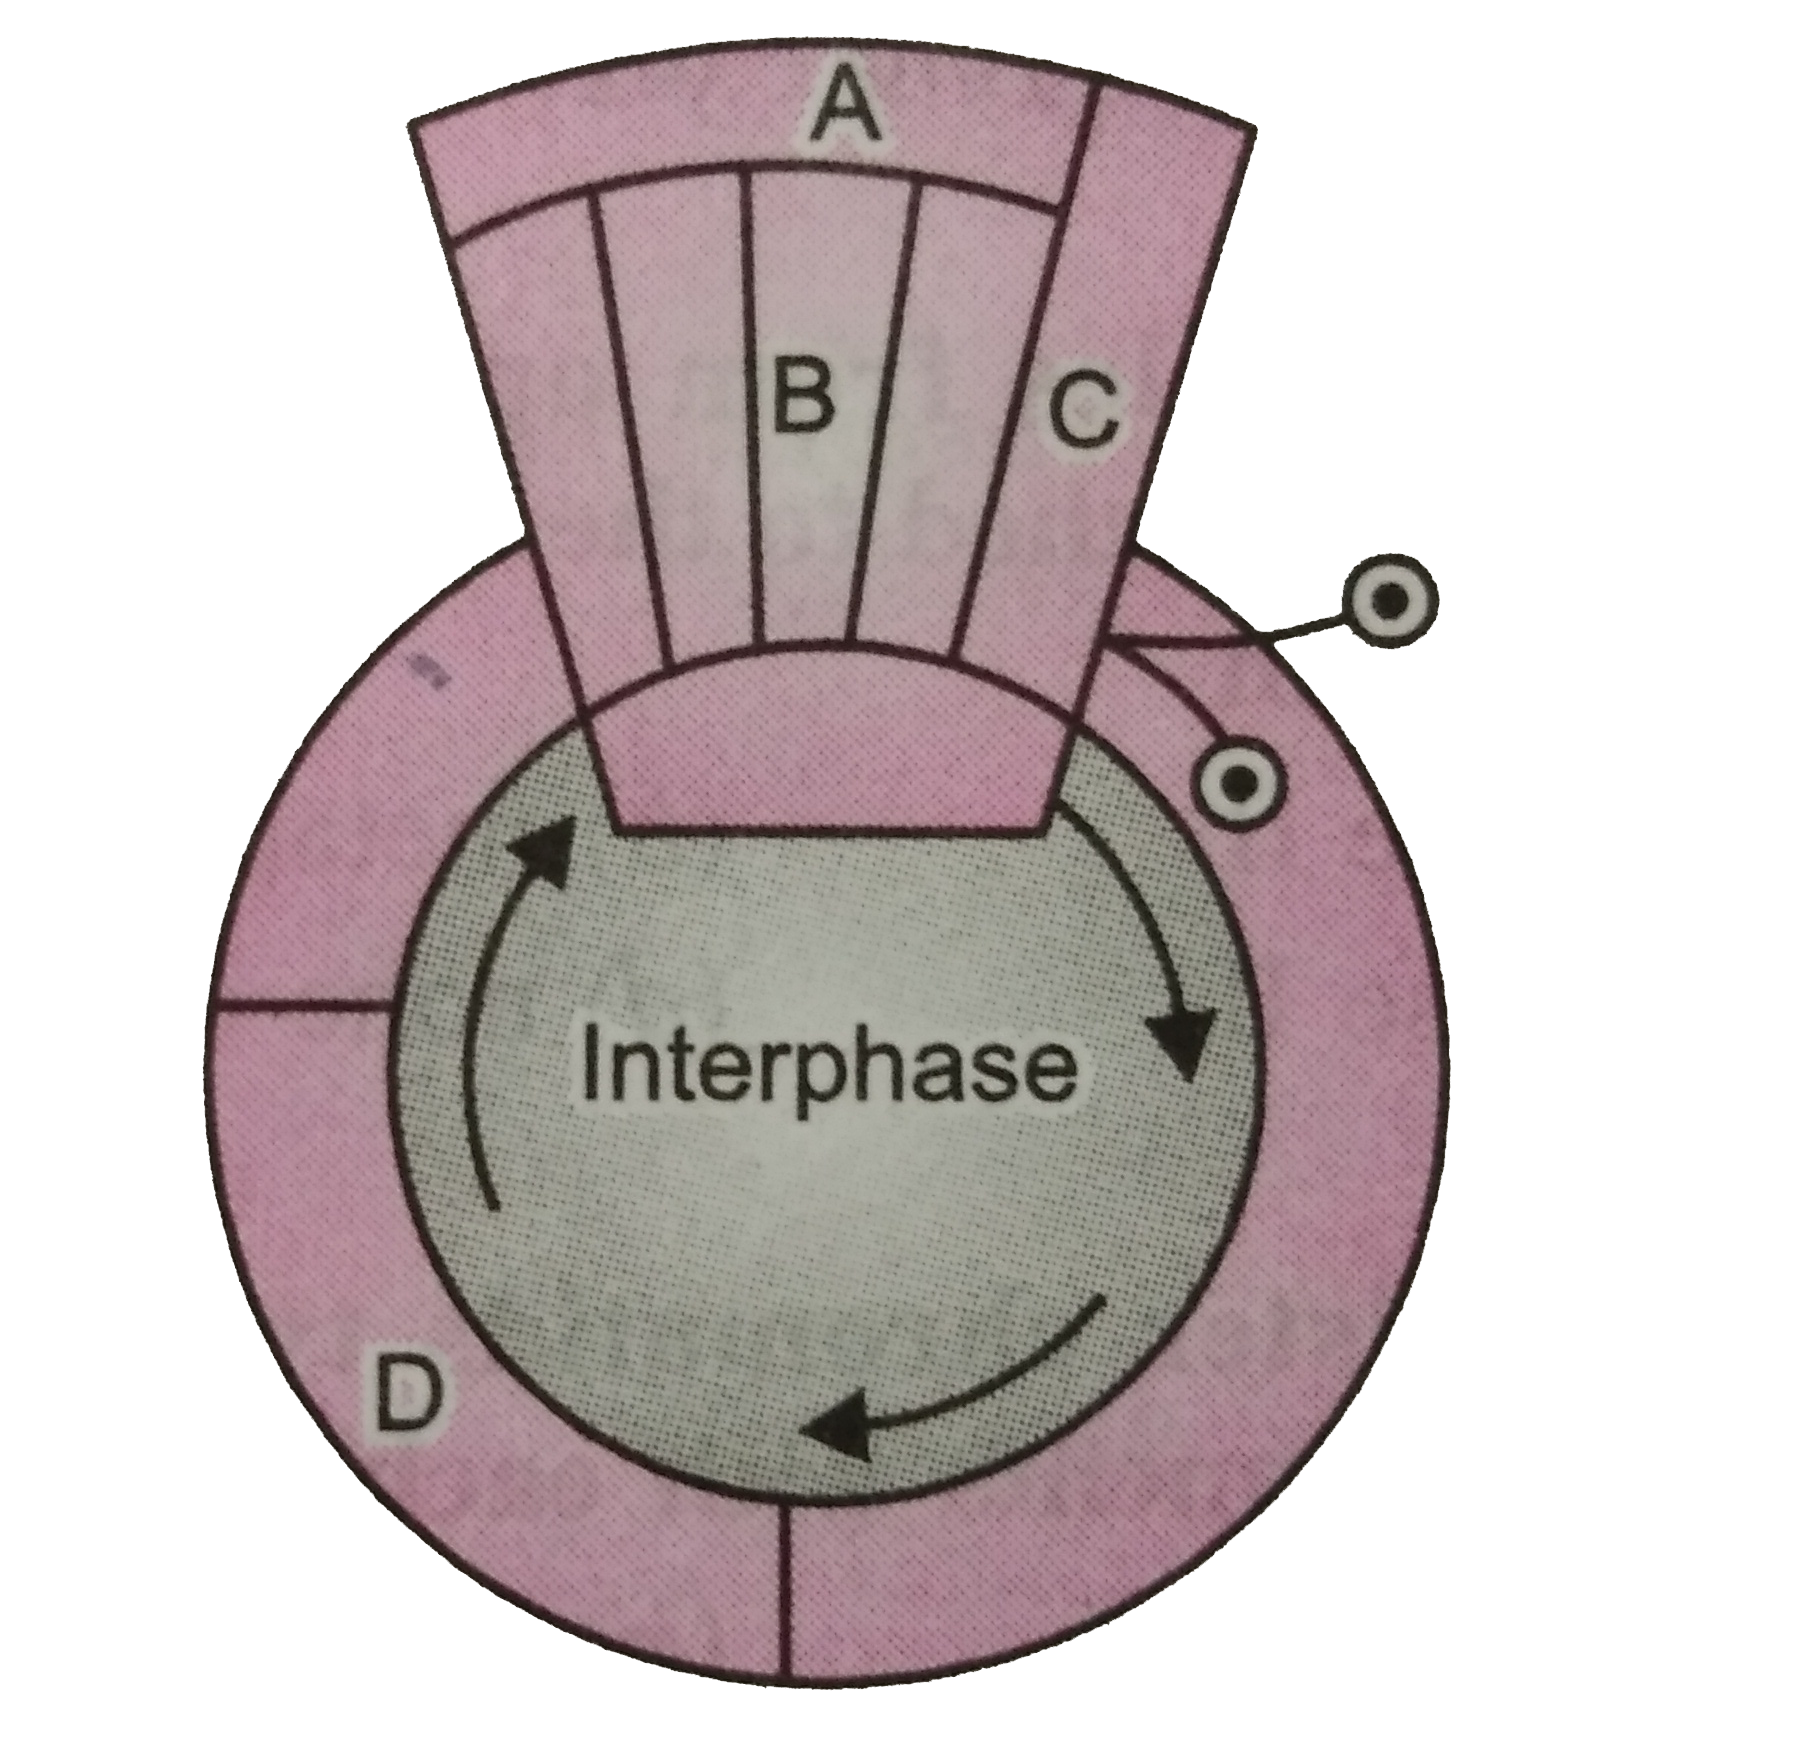 Gives is a schematic break-up of the phases/stage of cell cycle :       Which one of the following is the correct indication of the stage/phase in the cycle?